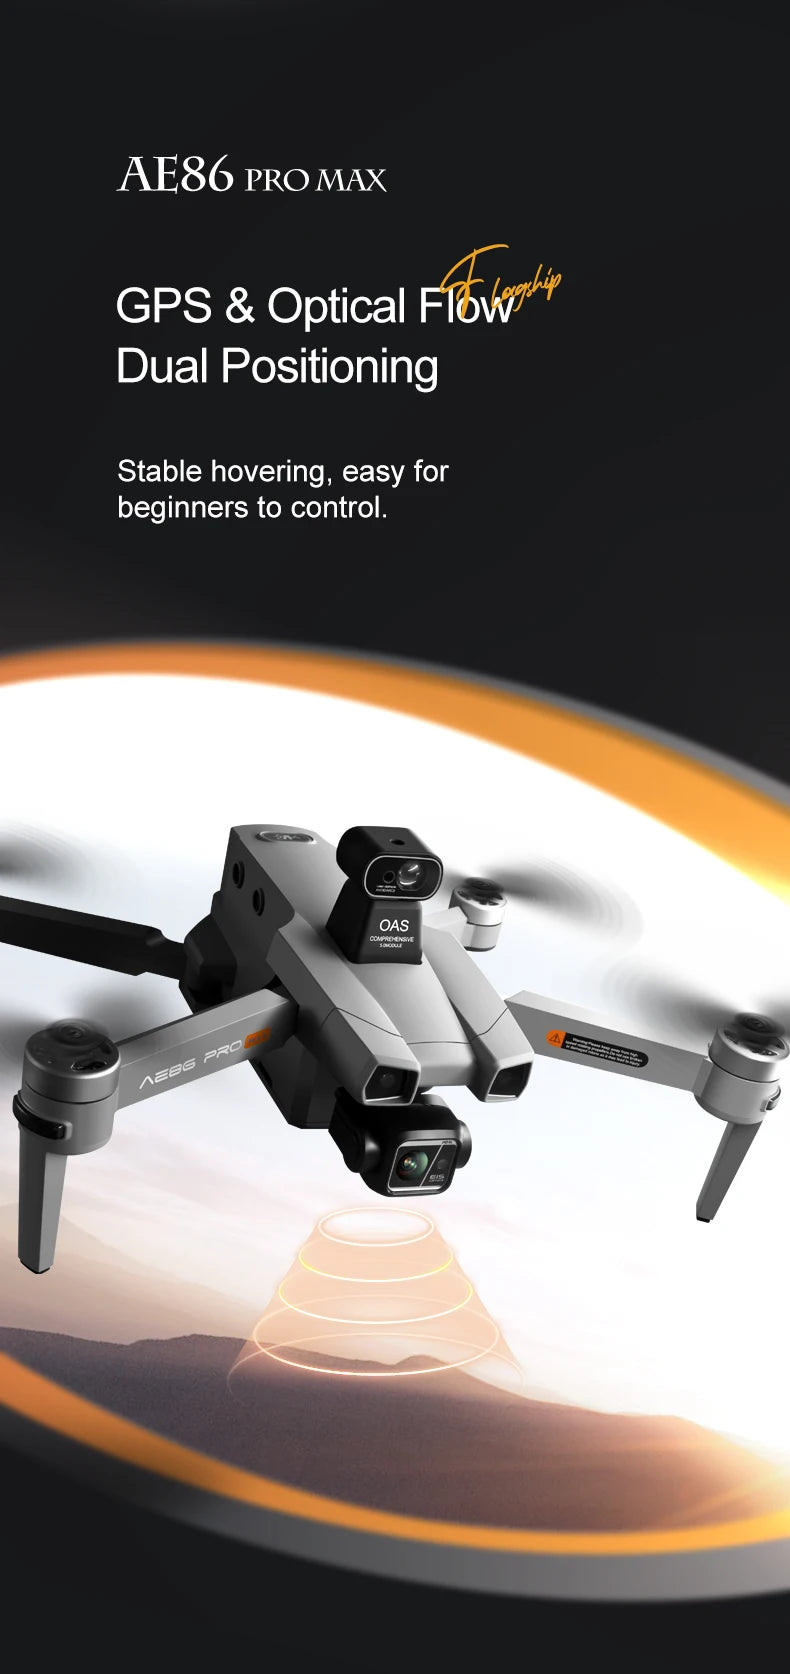 AE86 Pro Max Drone, AE86 PRO MAX GPS & Optical Flow? # Dual Positioning